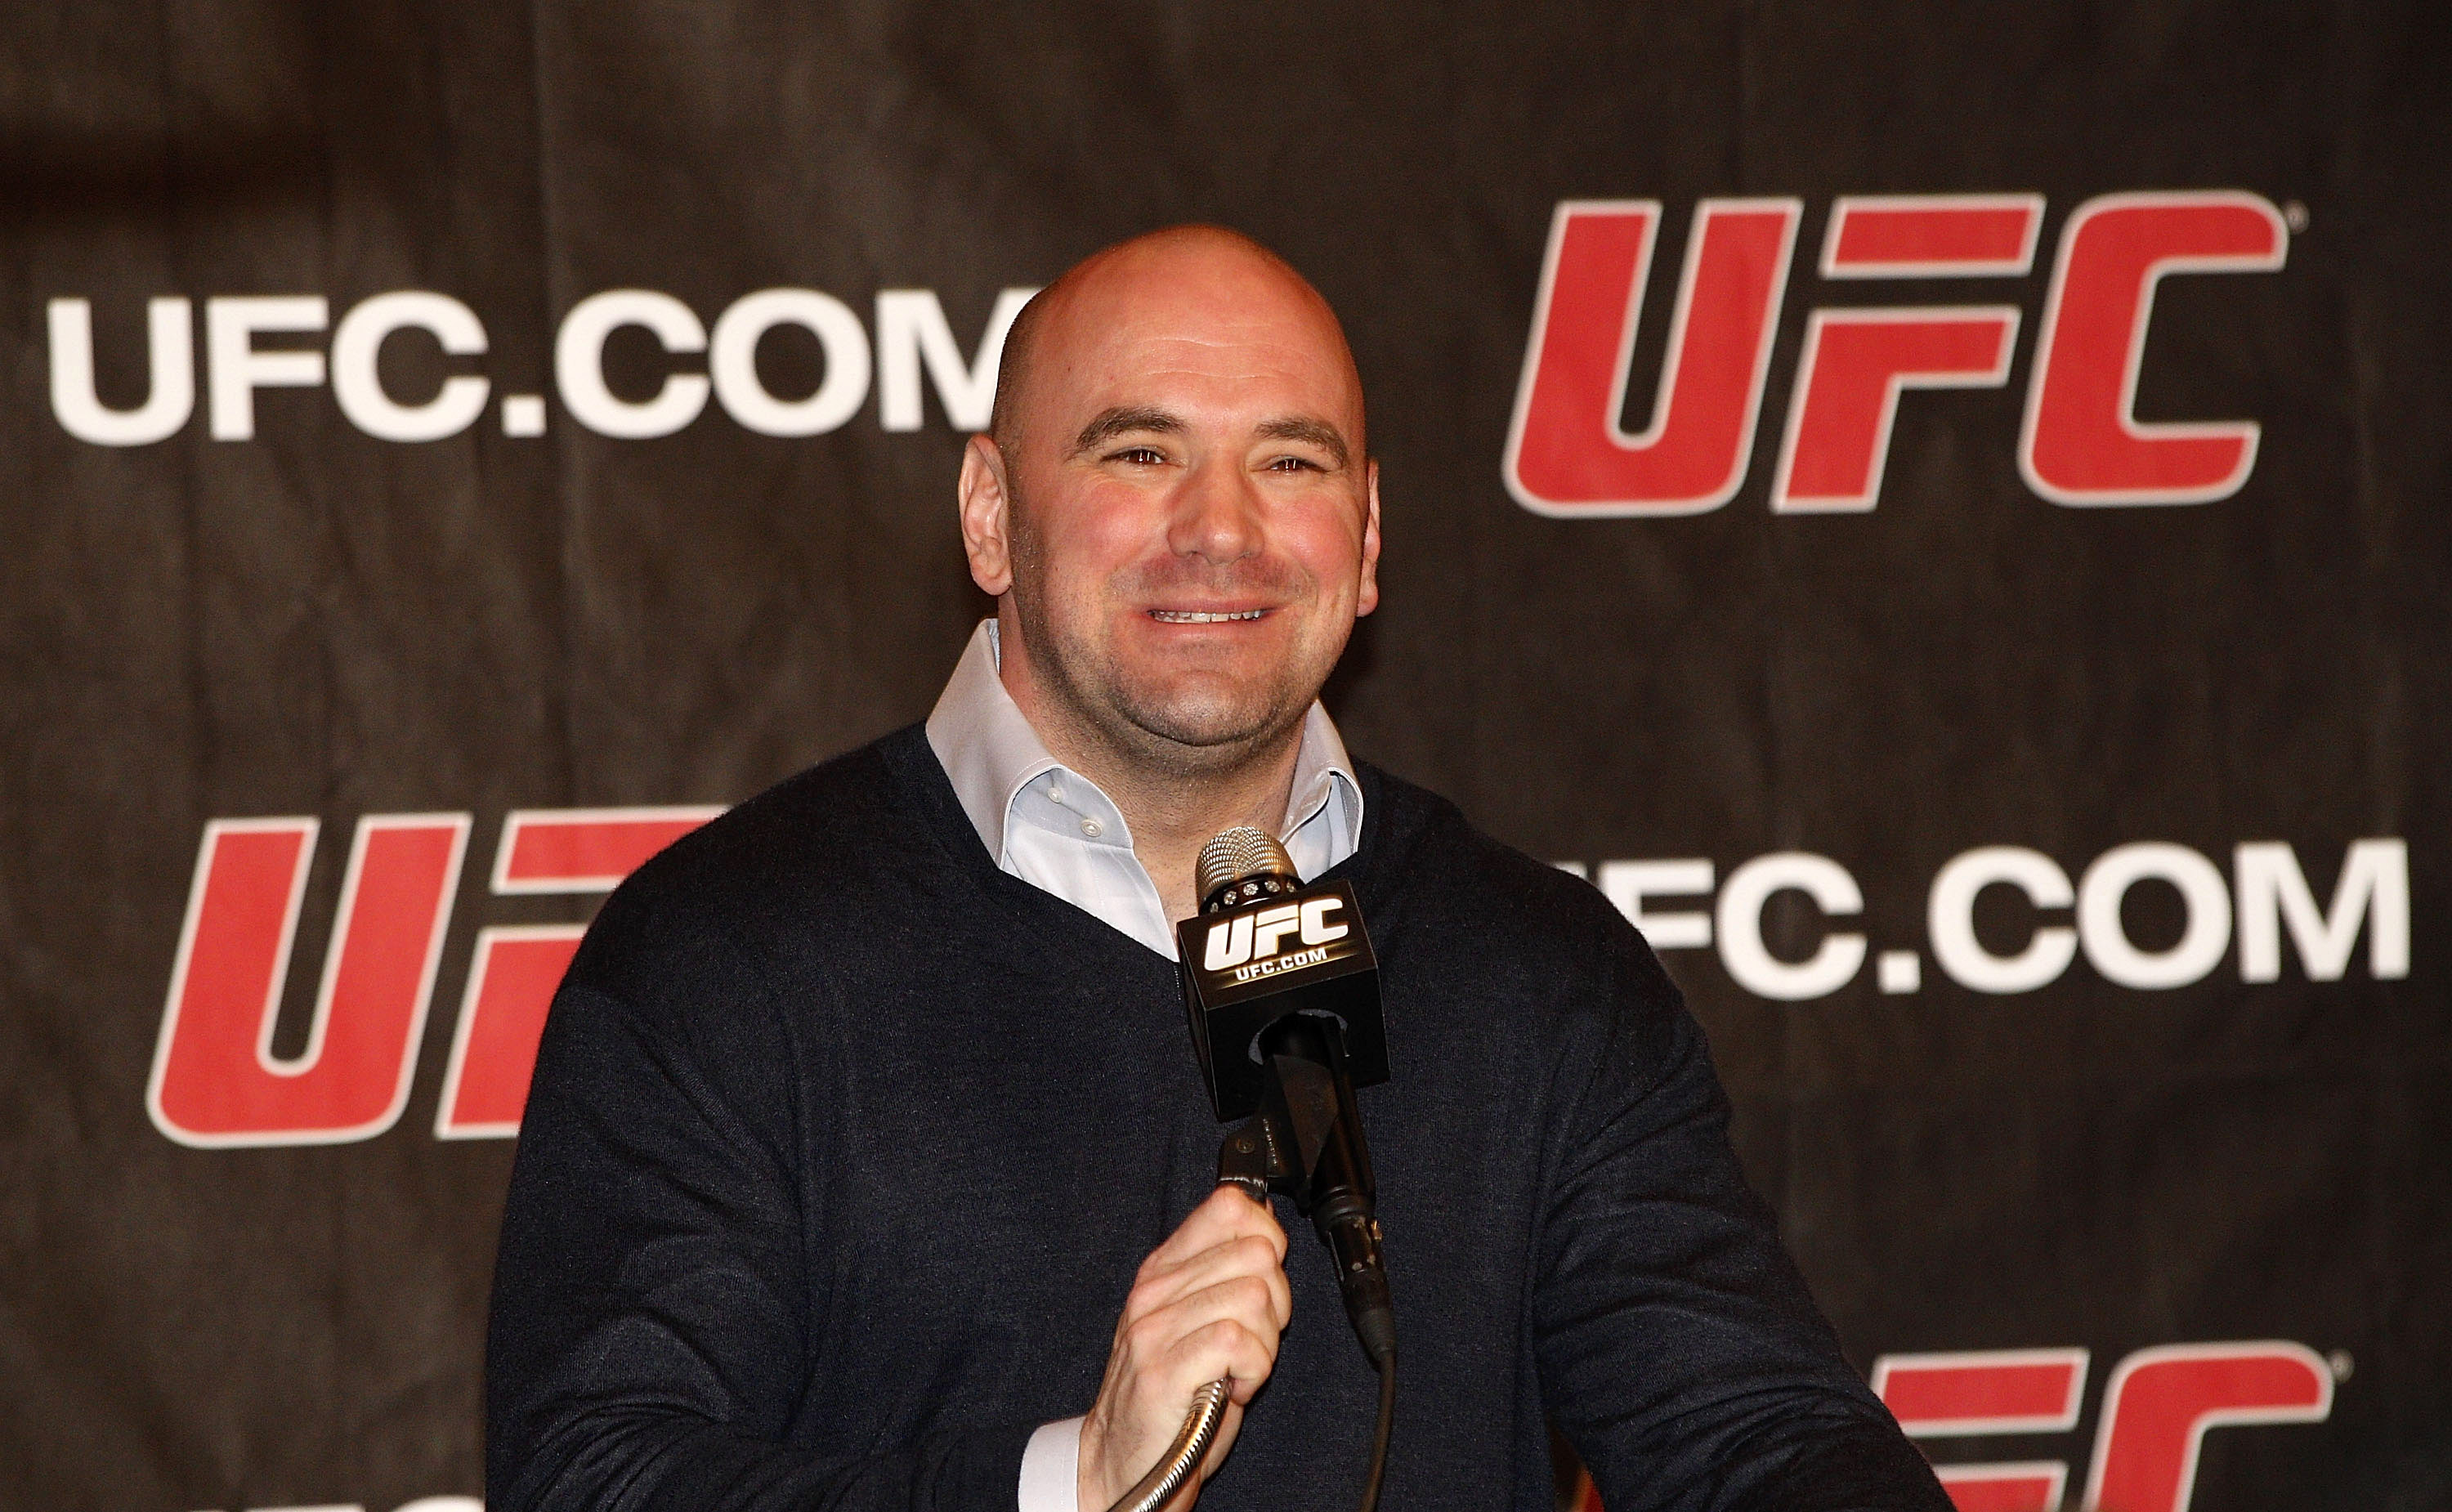 NEW YORK, NY - JANUARY 13:  Dana White, UFC President, speaks during a press conference to announce commitment to bring UFC to Madison Square Garden and New York State at Madison Square Garden on January 13, 2011 in New York City.  (Photo by Michael Cohen